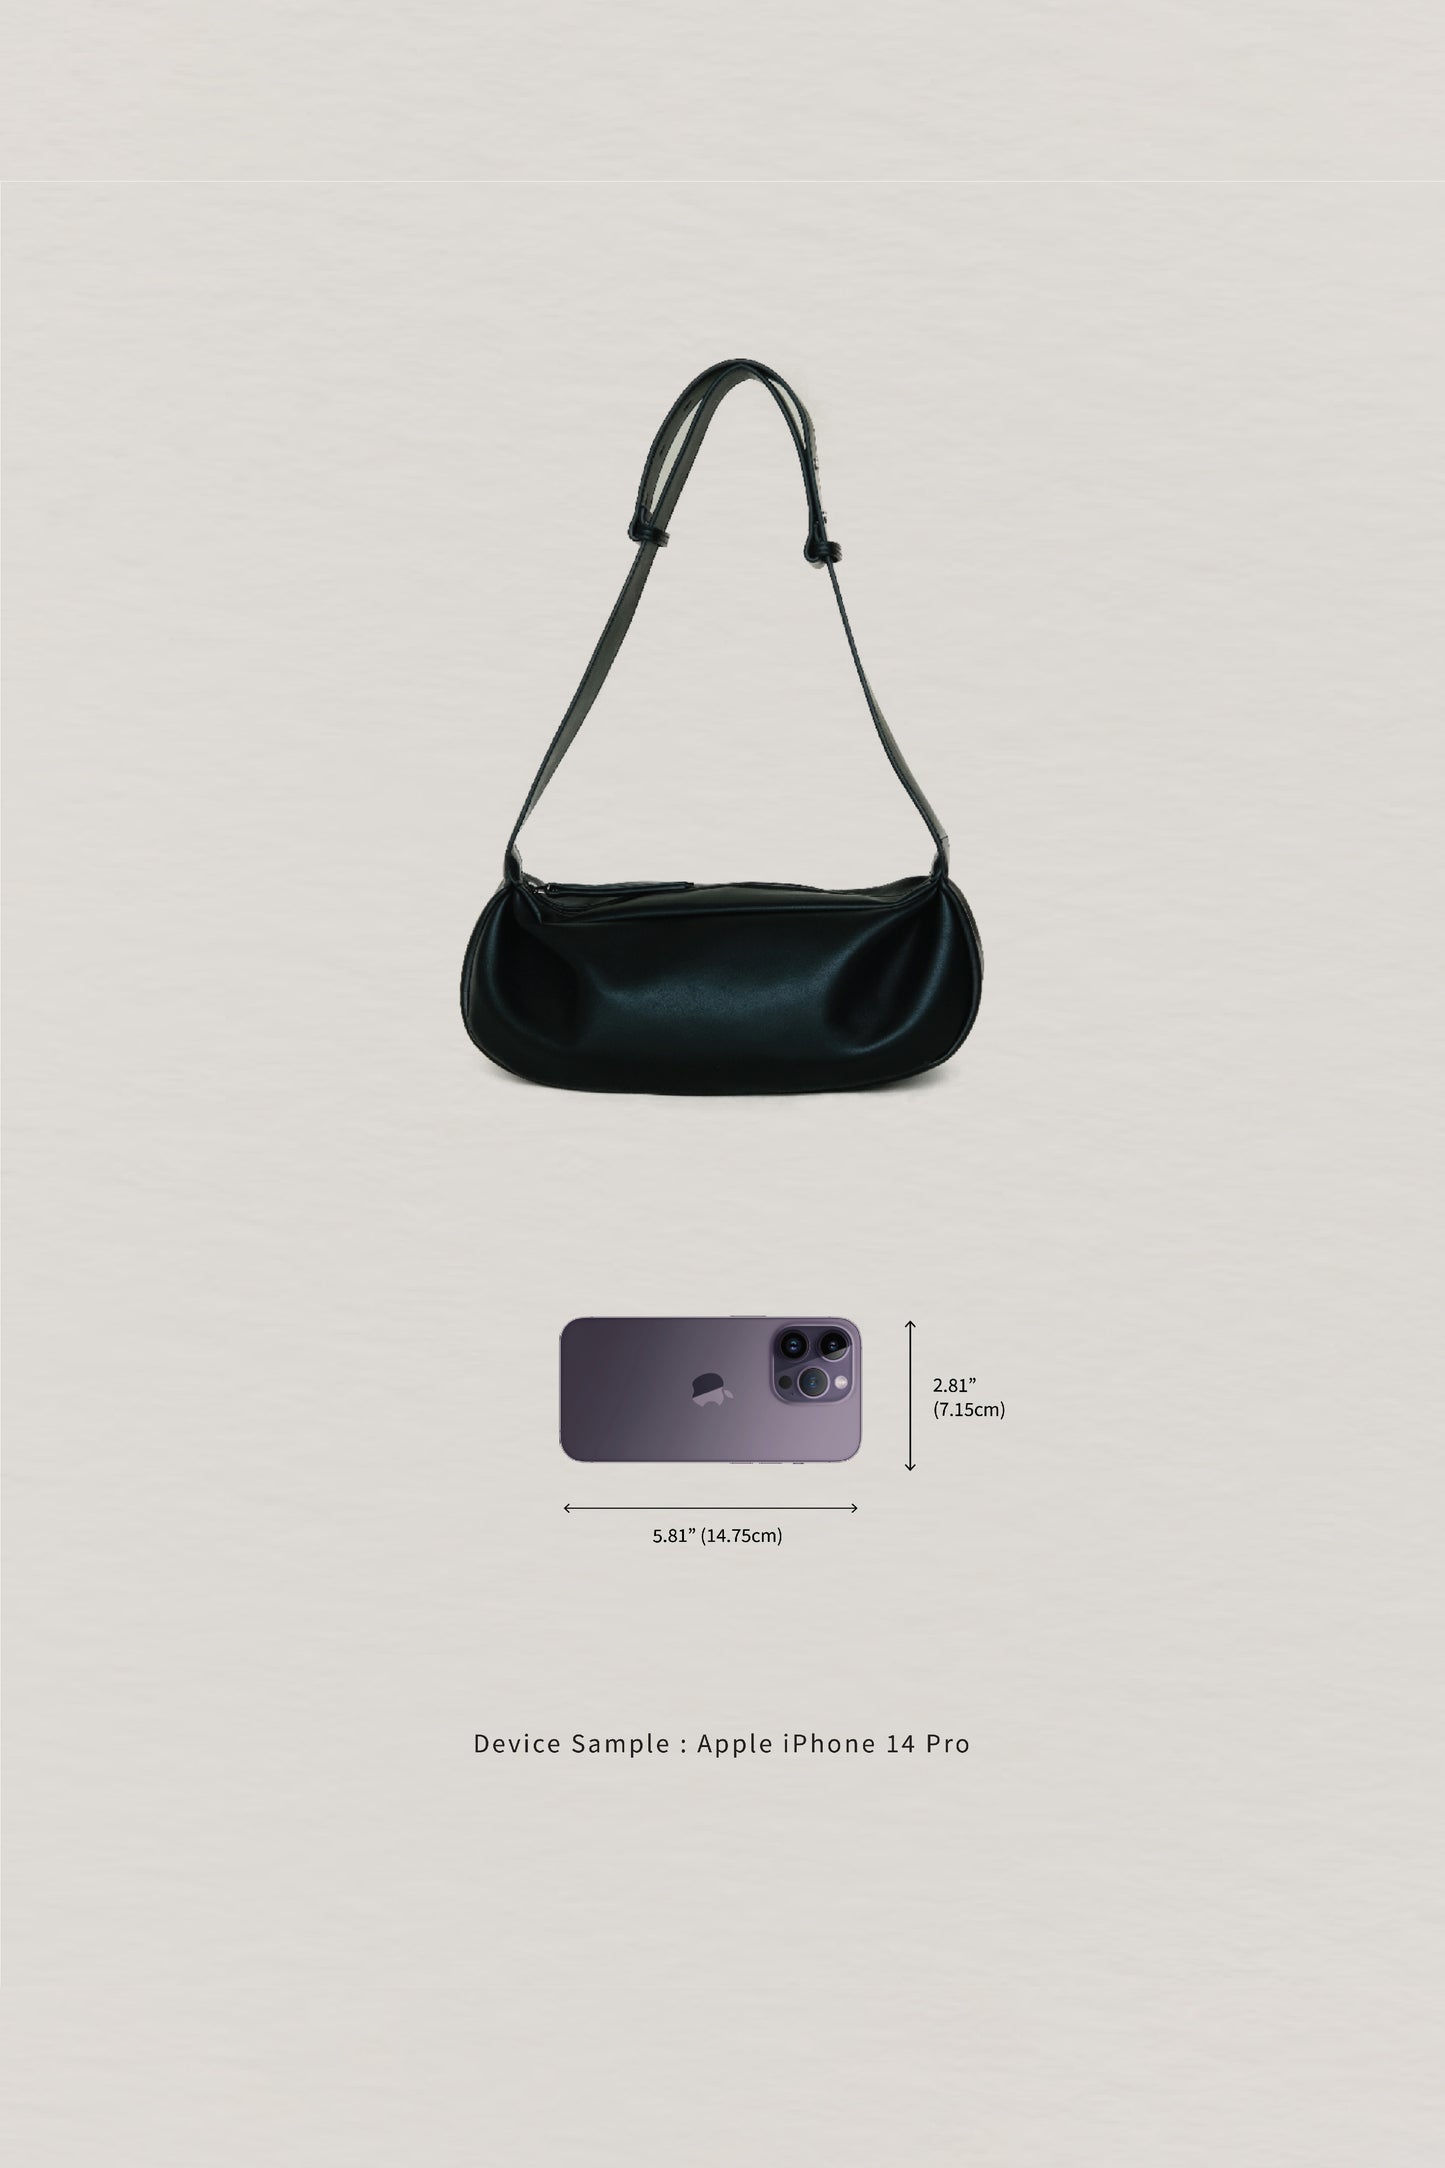 PU soft leather pillow bag in classic black